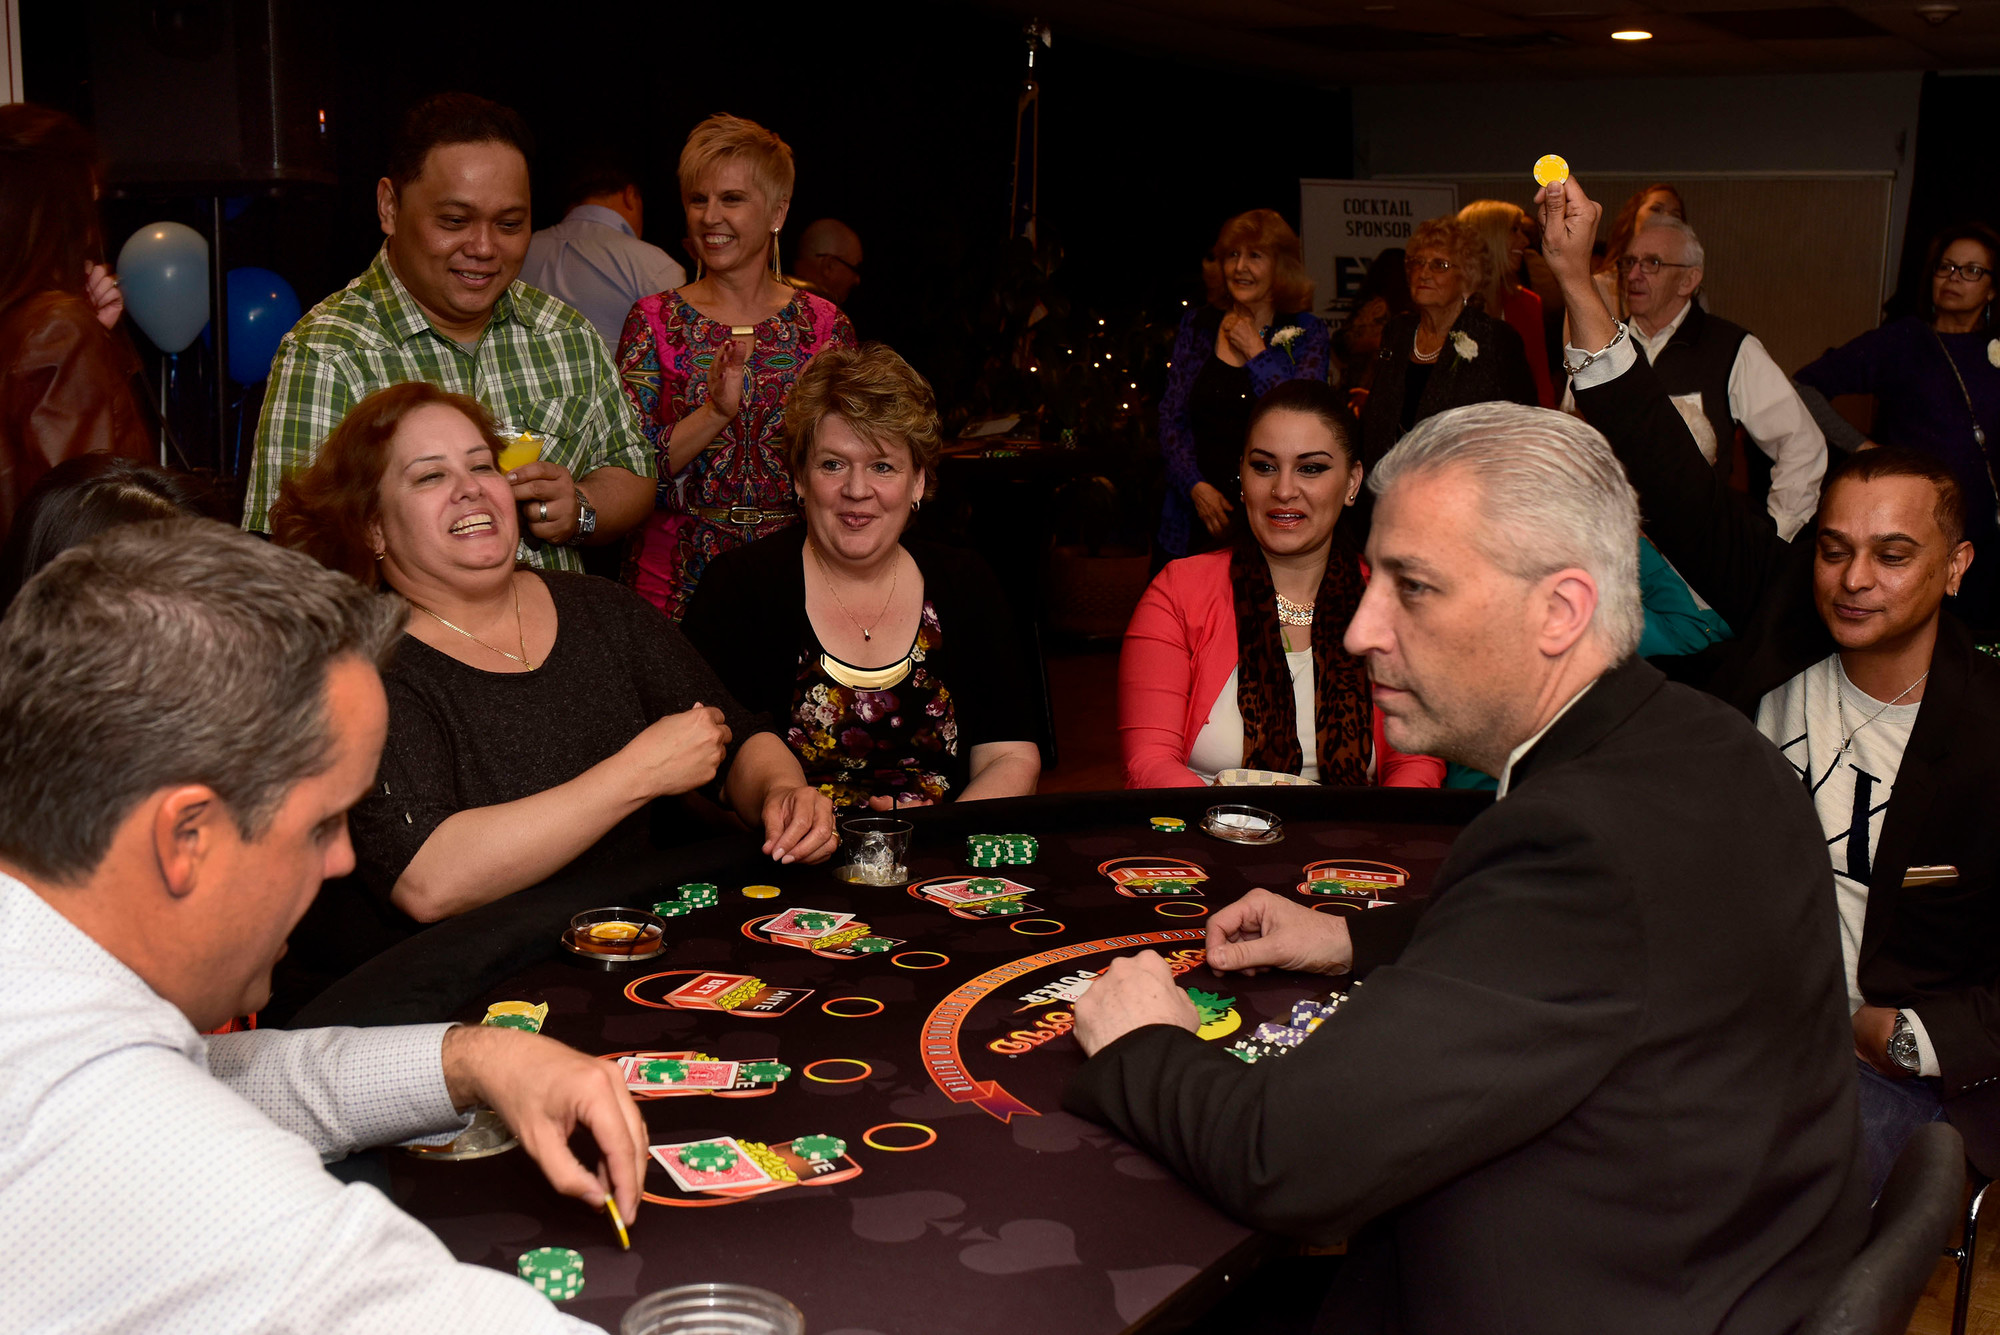 Professional dealers ran casino-style games for guests.